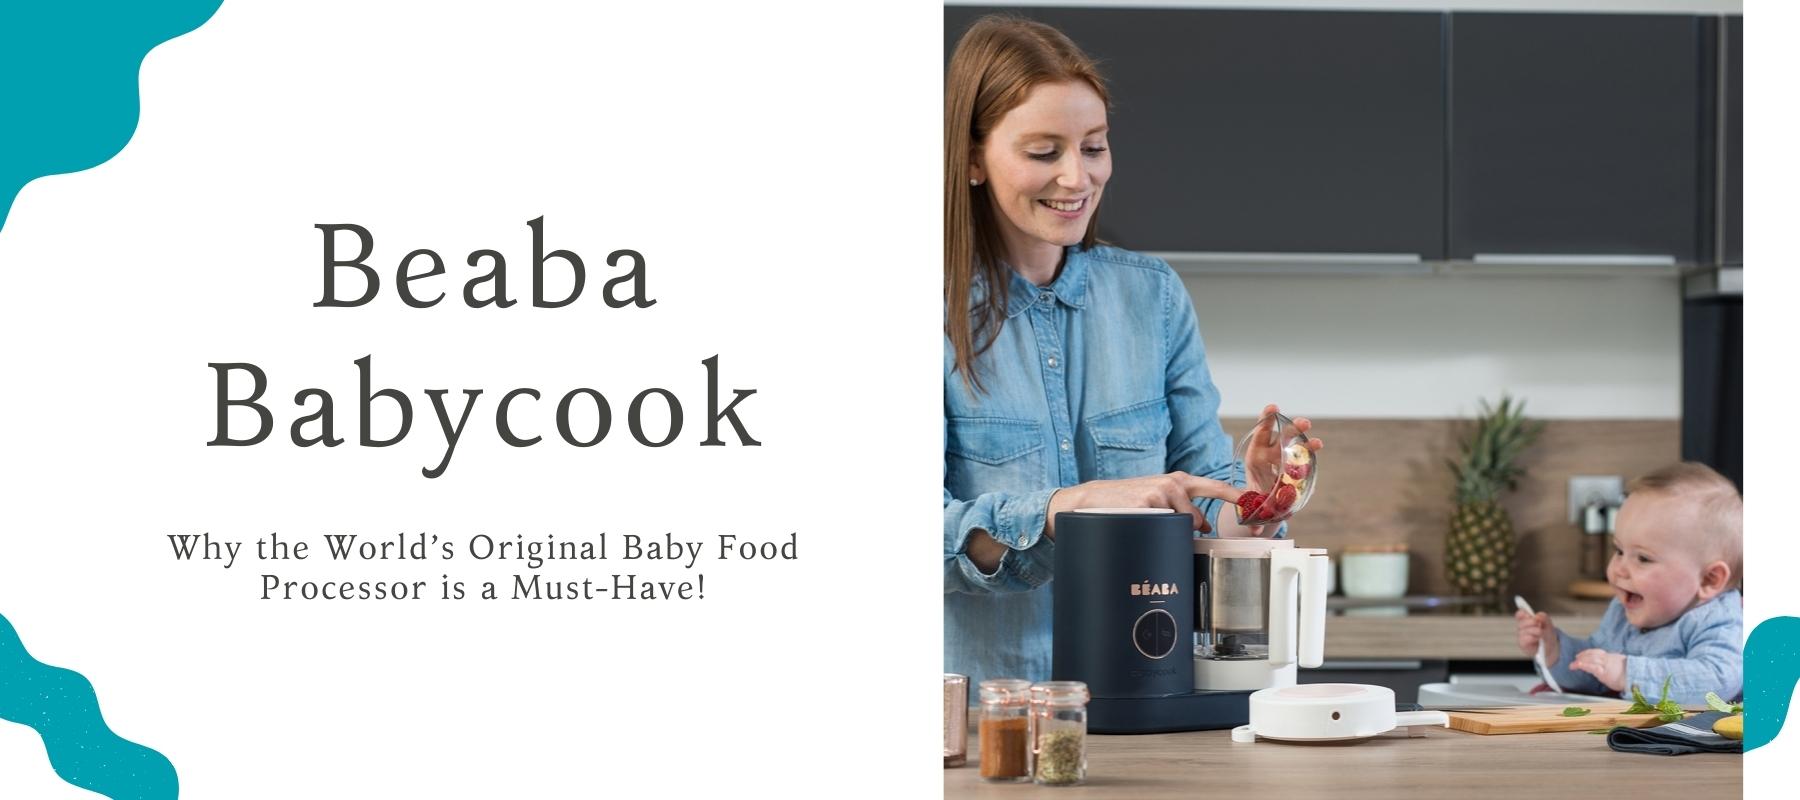 How To Make Baby Food With BEABA